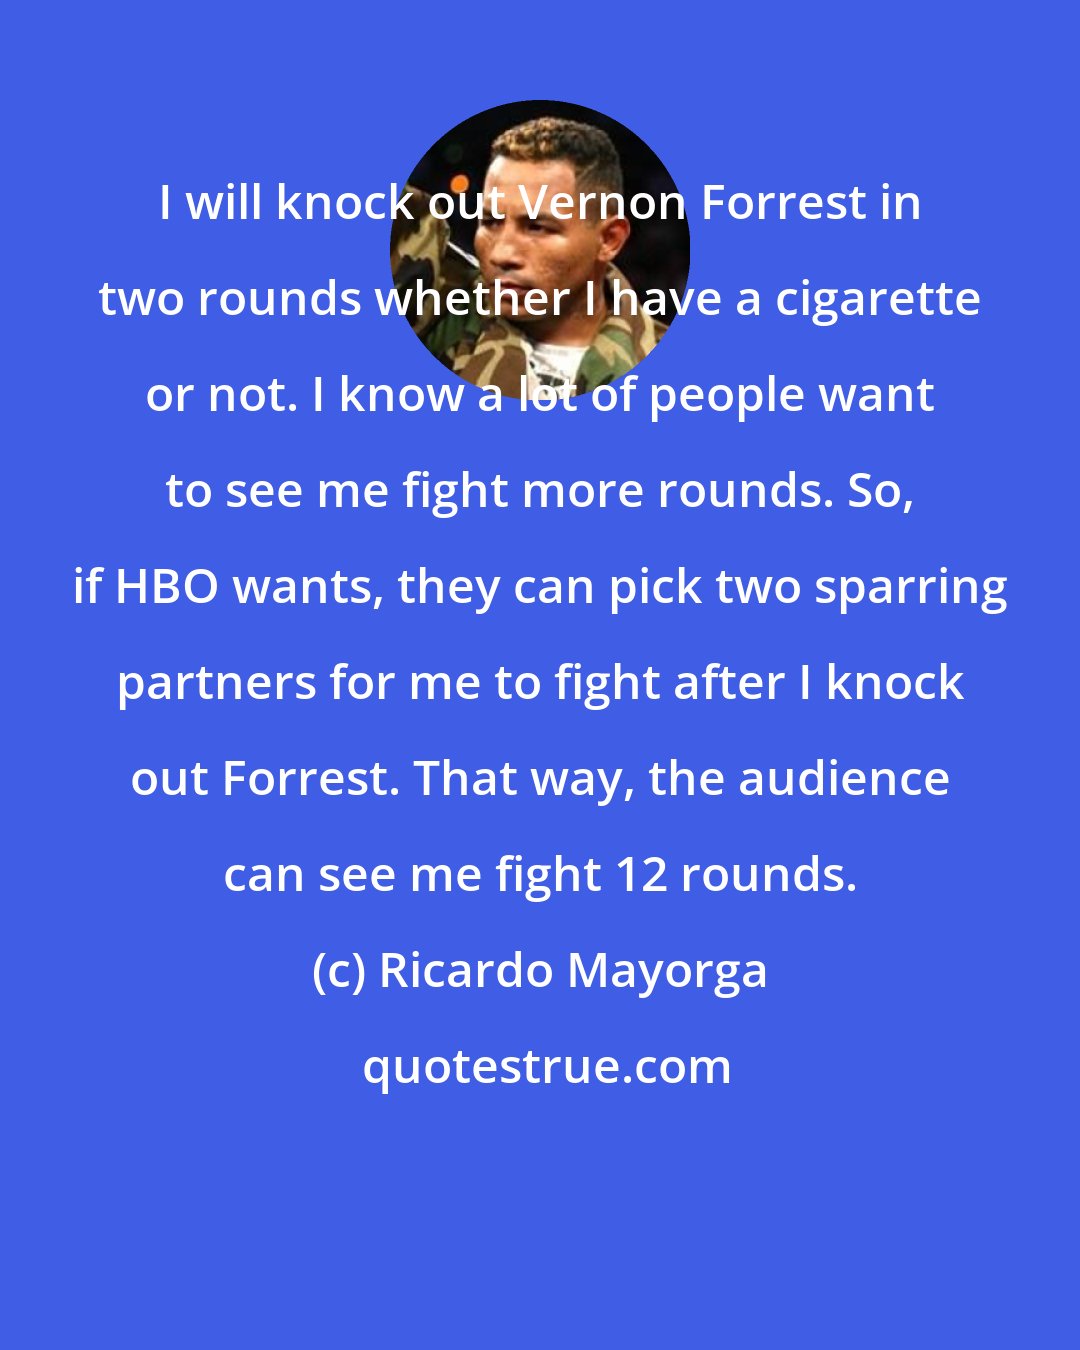 Ricardo Mayorga: I will knock out Vernon Forrest in two rounds whether I have a cigarette or not. I know a lot of people want to see me fight more rounds. So, if HBO wants, they can pick two sparring partners for me to fight after I knock out Forrest. That way, the audience can see me fight 12 rounds.